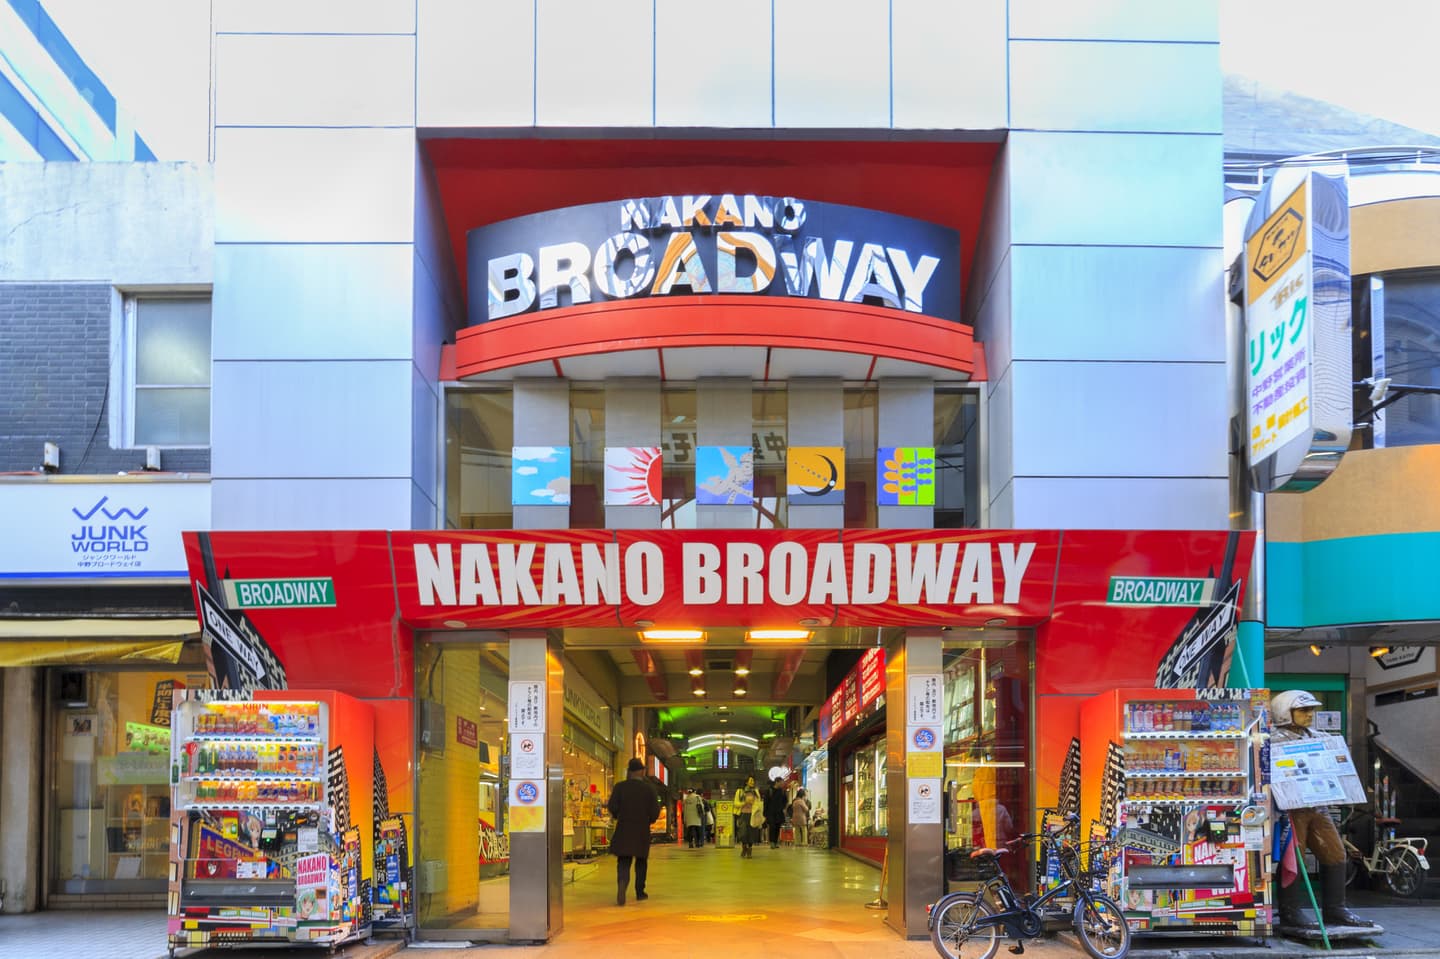 Images of the entrance of Nakano Broadway